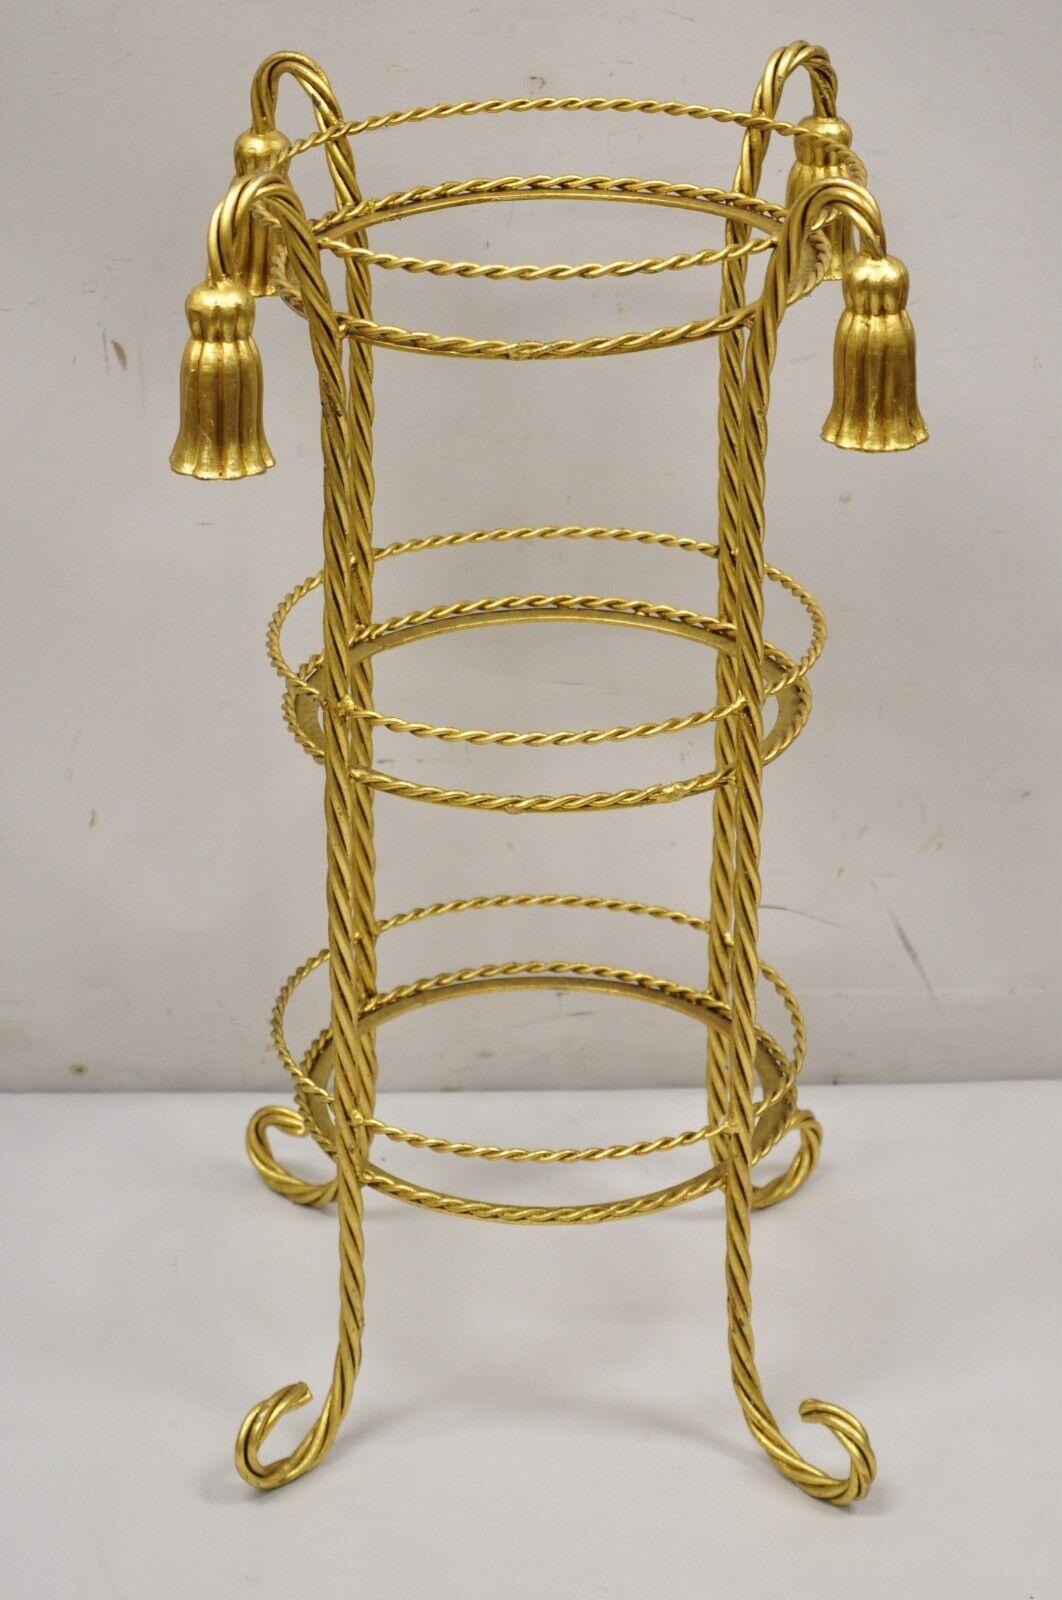 20th Century Italian Hollywood Regency 3 Tier Gold Iron Rope Tassel Stand Side Tables, Pair For Sale